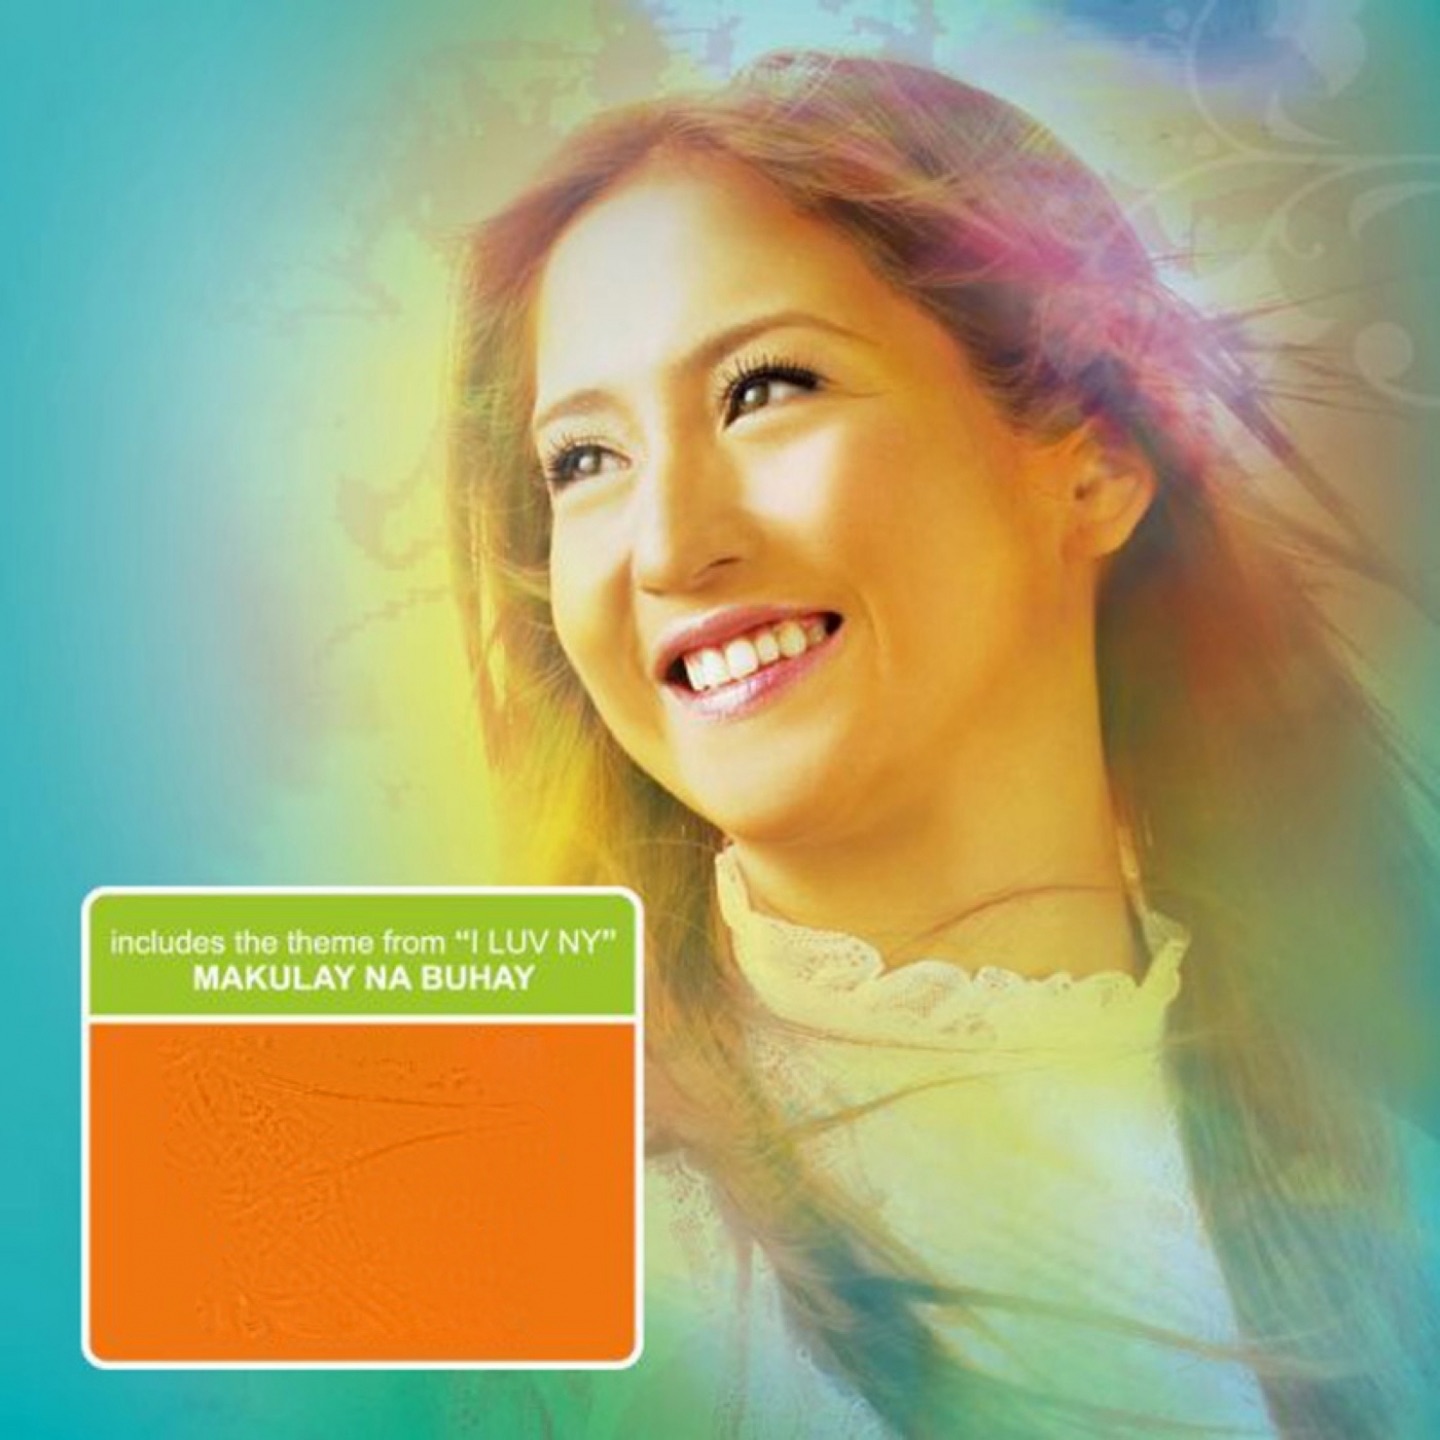 Jolina Magdangal - Tuloy Pa Rin Ang Awit (Special Edition) (2014) [iTunes Plus AAC M4A]-新房子